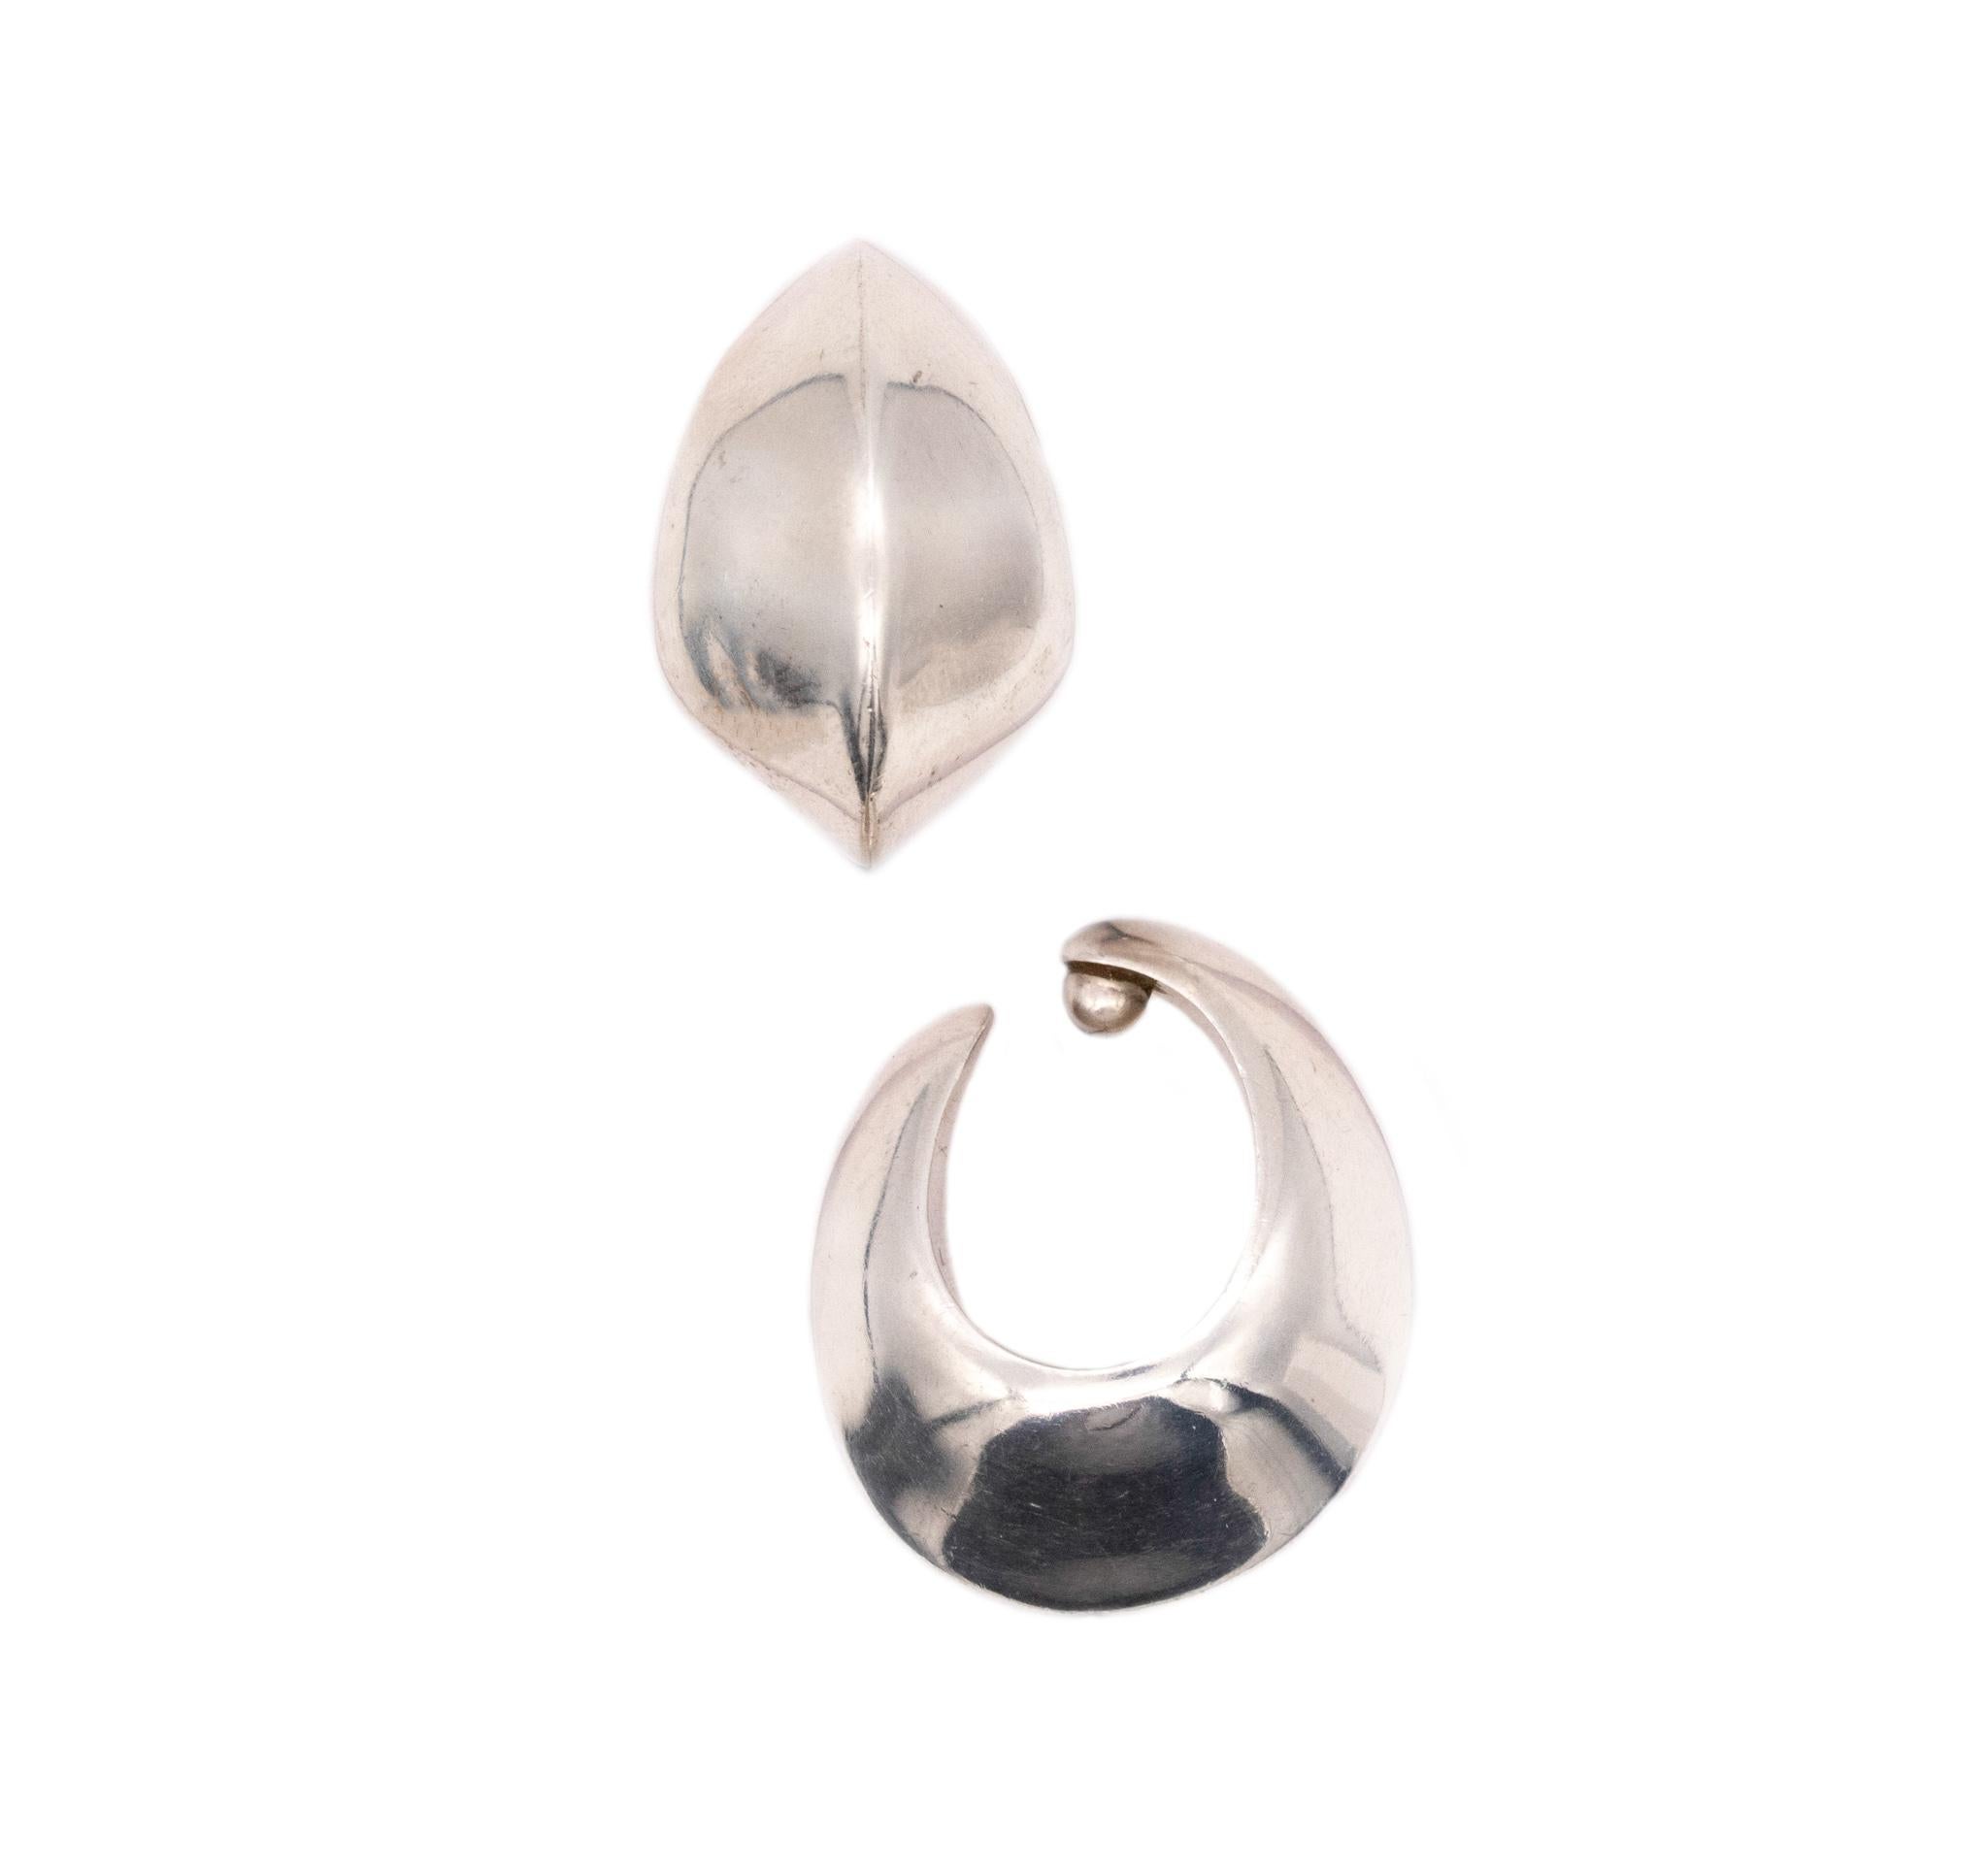 Hoops-earrings designed by Nanna Ditzel for Georg Jensen. 

These are a very rare sculptural pair of hoops earrings, created in Denmark at the Georg Jensen Studios by Nanna Ditzel, back in the 1958. This pair of hoops are the model number 126 and